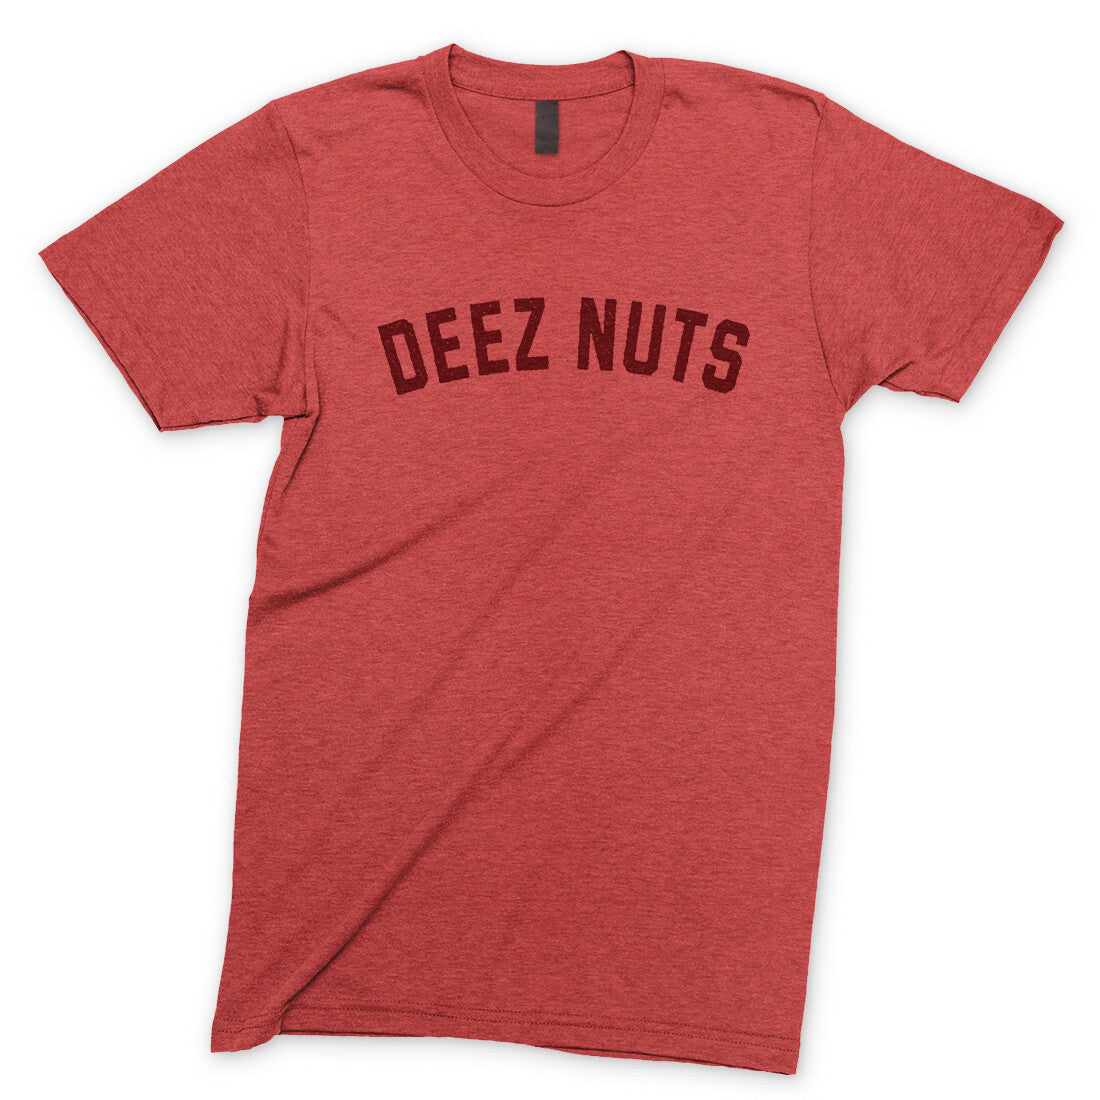 Deez Nuts in Heather Red Color